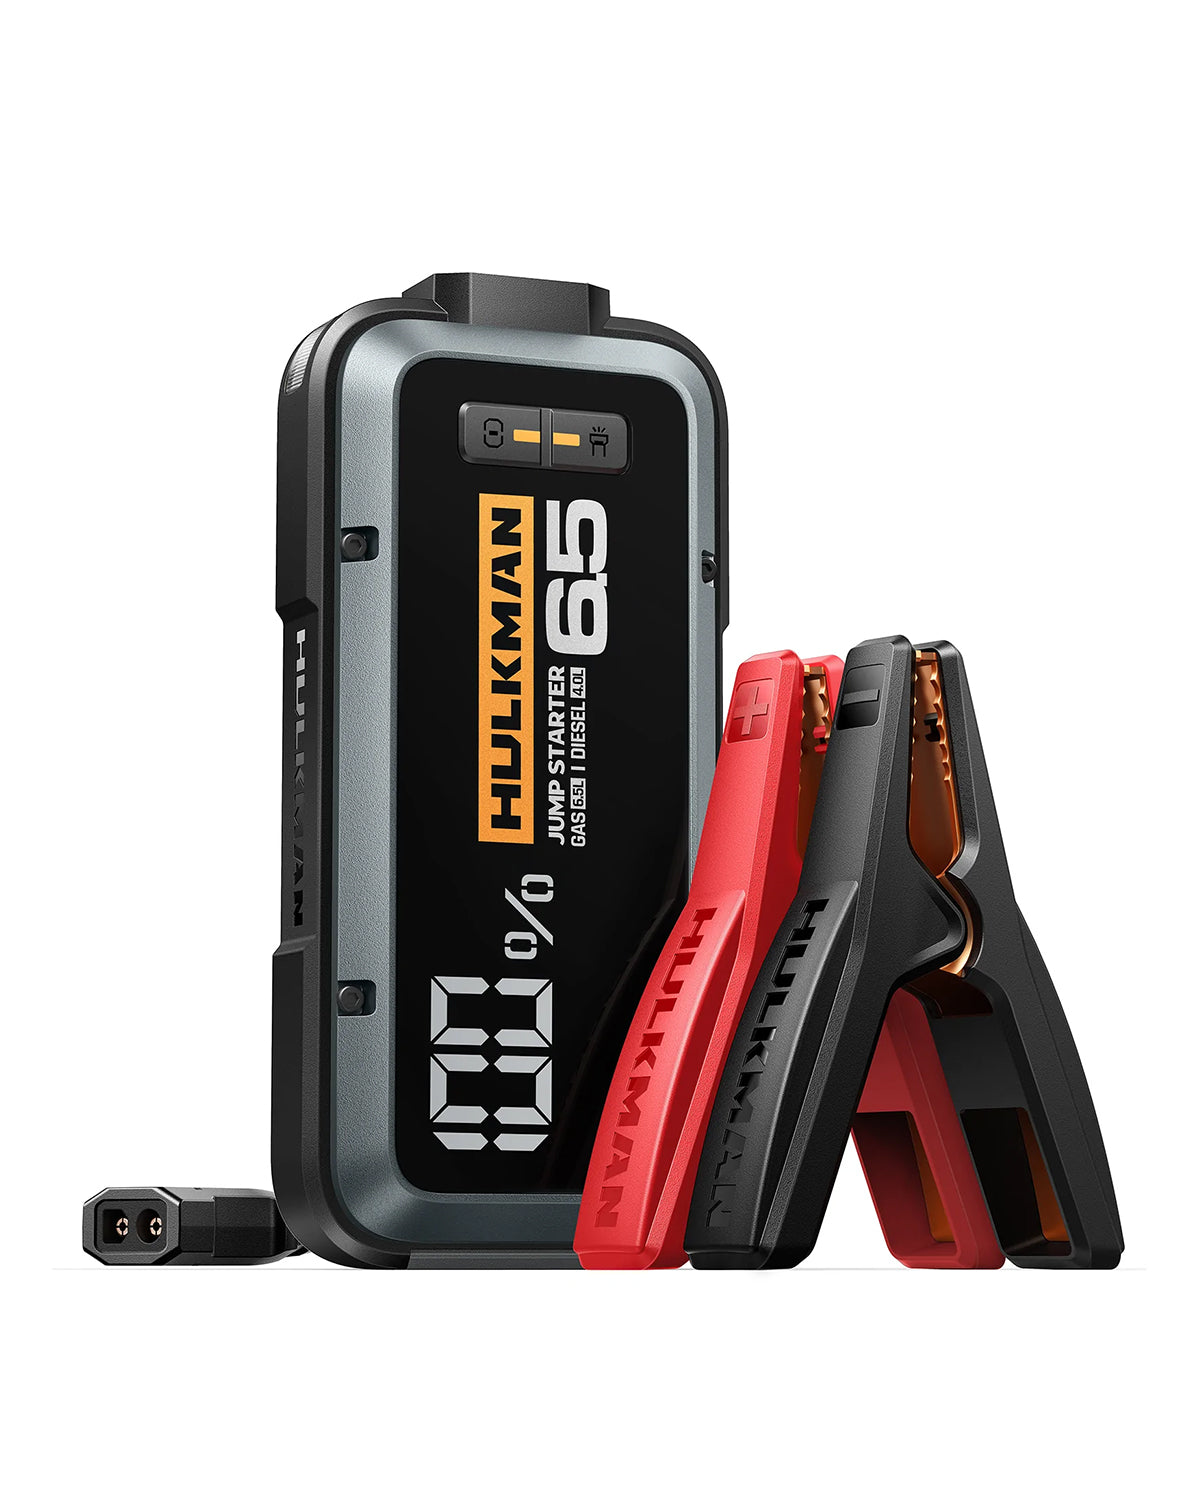 GooLoo GP4000 Jump Starter Power Bank - Product Review 